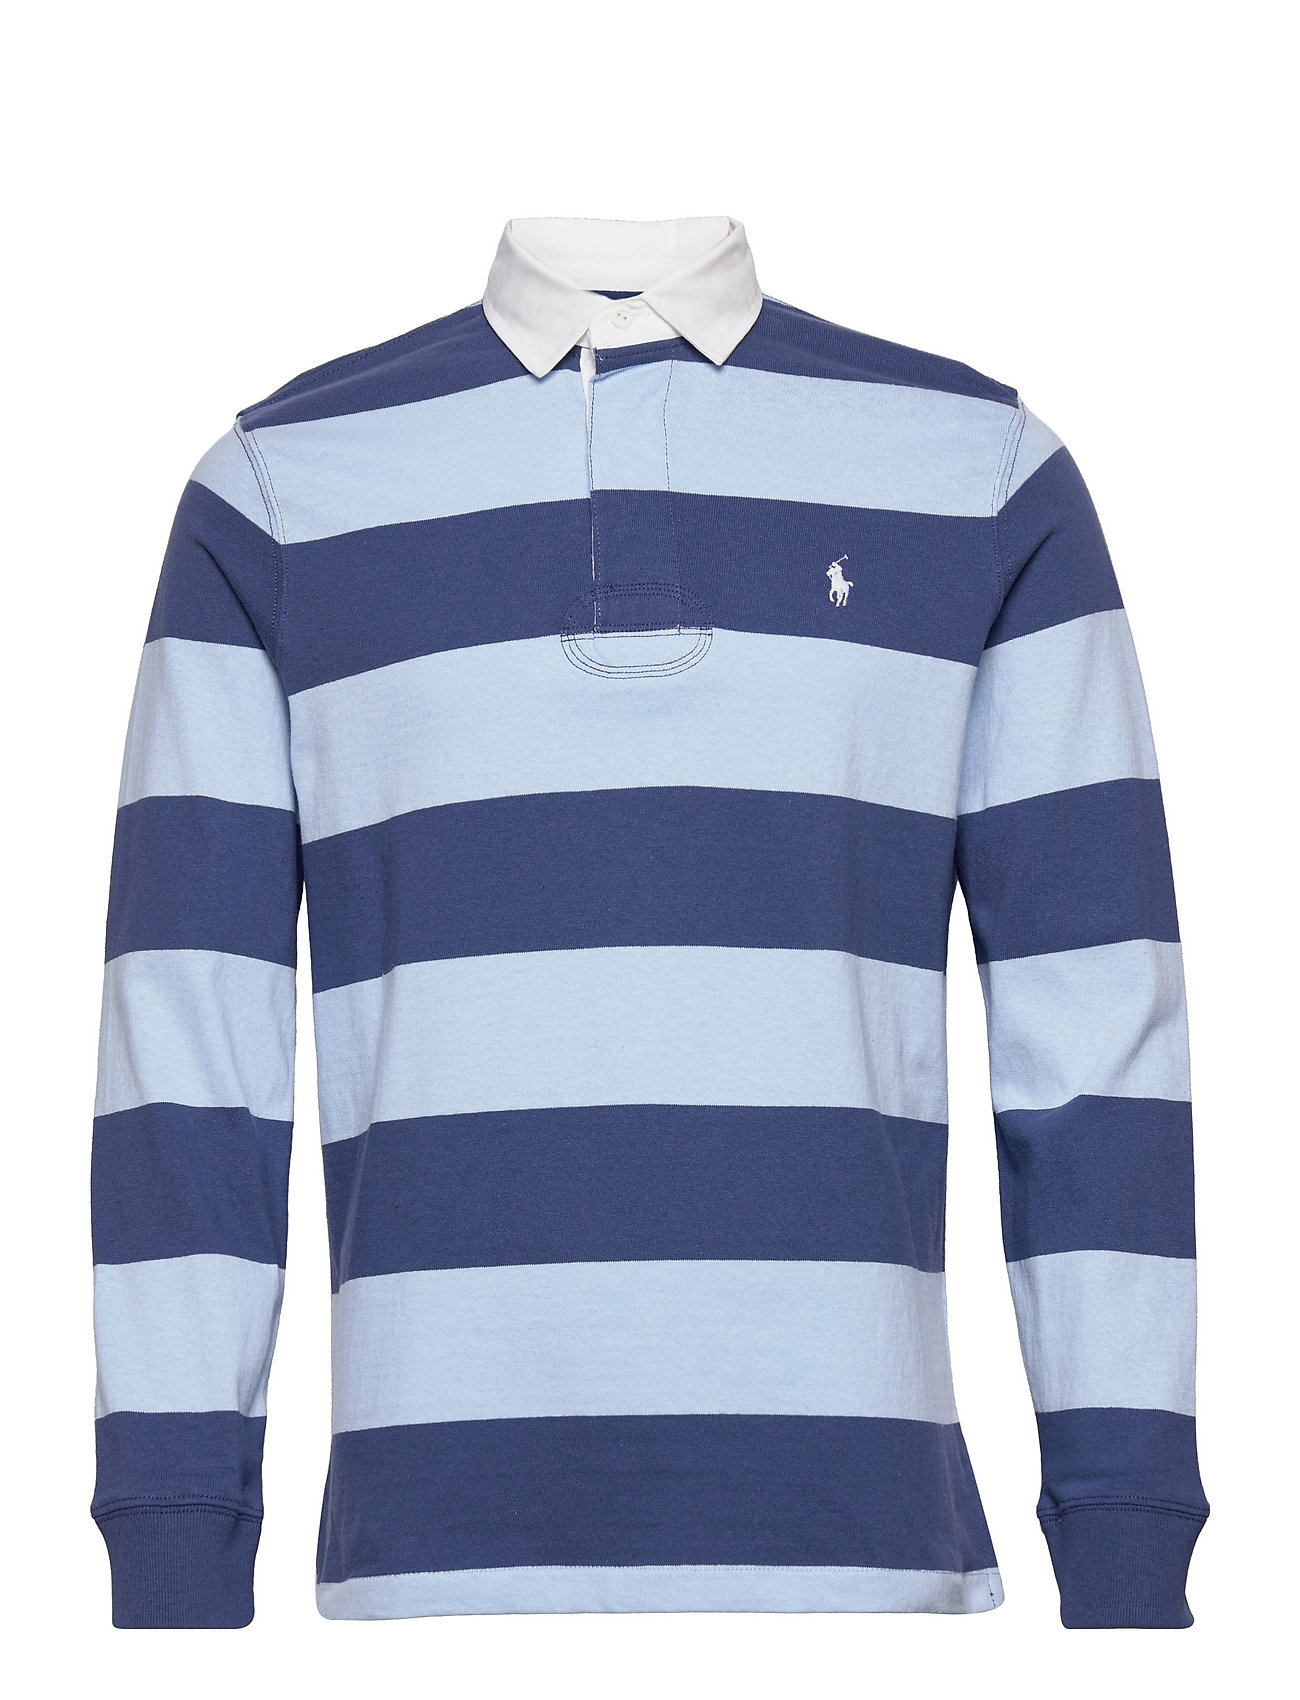 Polo Ralph Lauren The Iconic Rugby Shirt Blue Polo Ralph Lauren